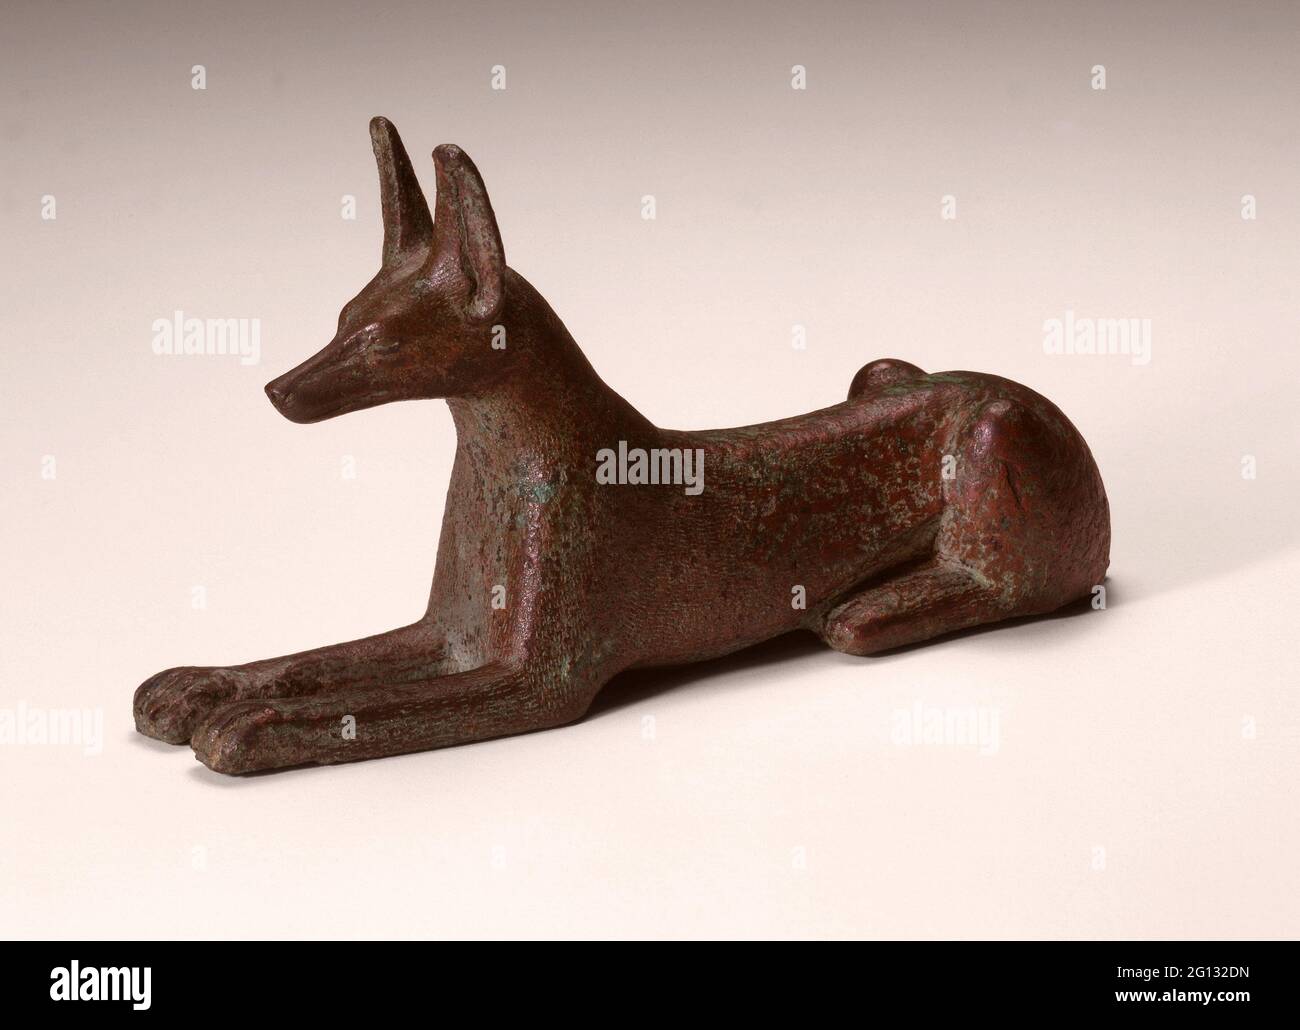 Ancient Egyptian. Statuette of a Jackal - Saite Period, Dynasty 26 (664 - 525 BC) - Egyptian. Bronze. 664 BC - 525 BC. Stock Photo